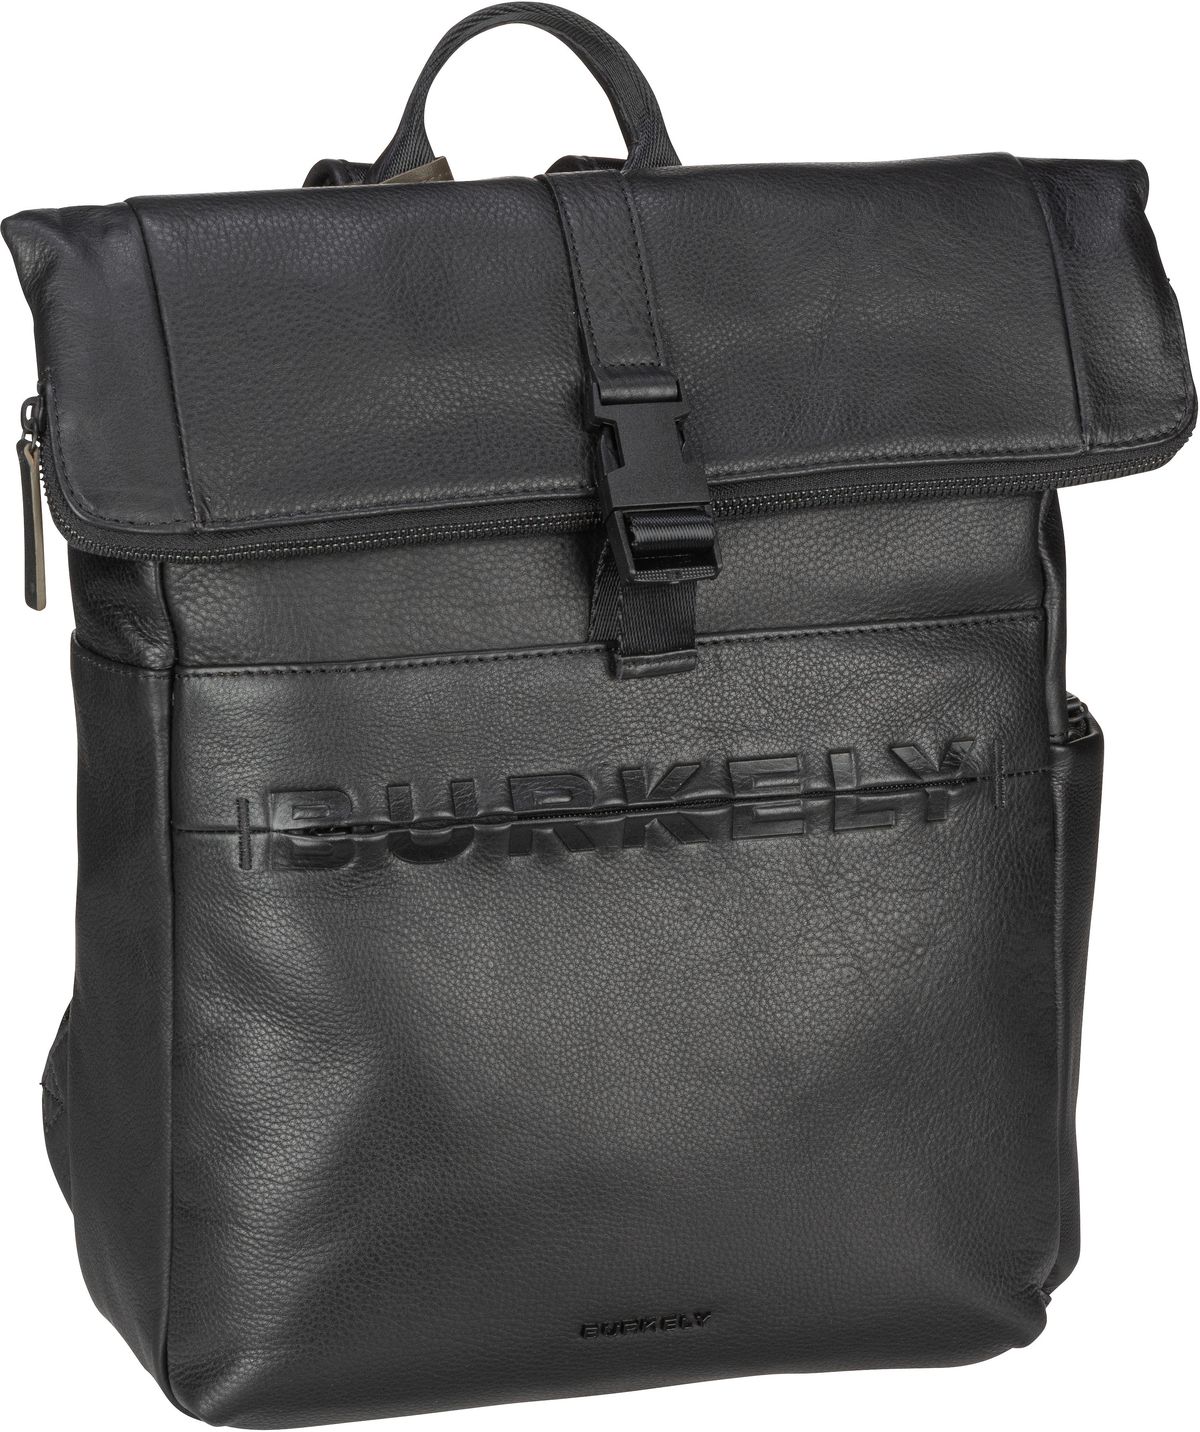 Burkely Moving Madox Rolltop Backpack - Black